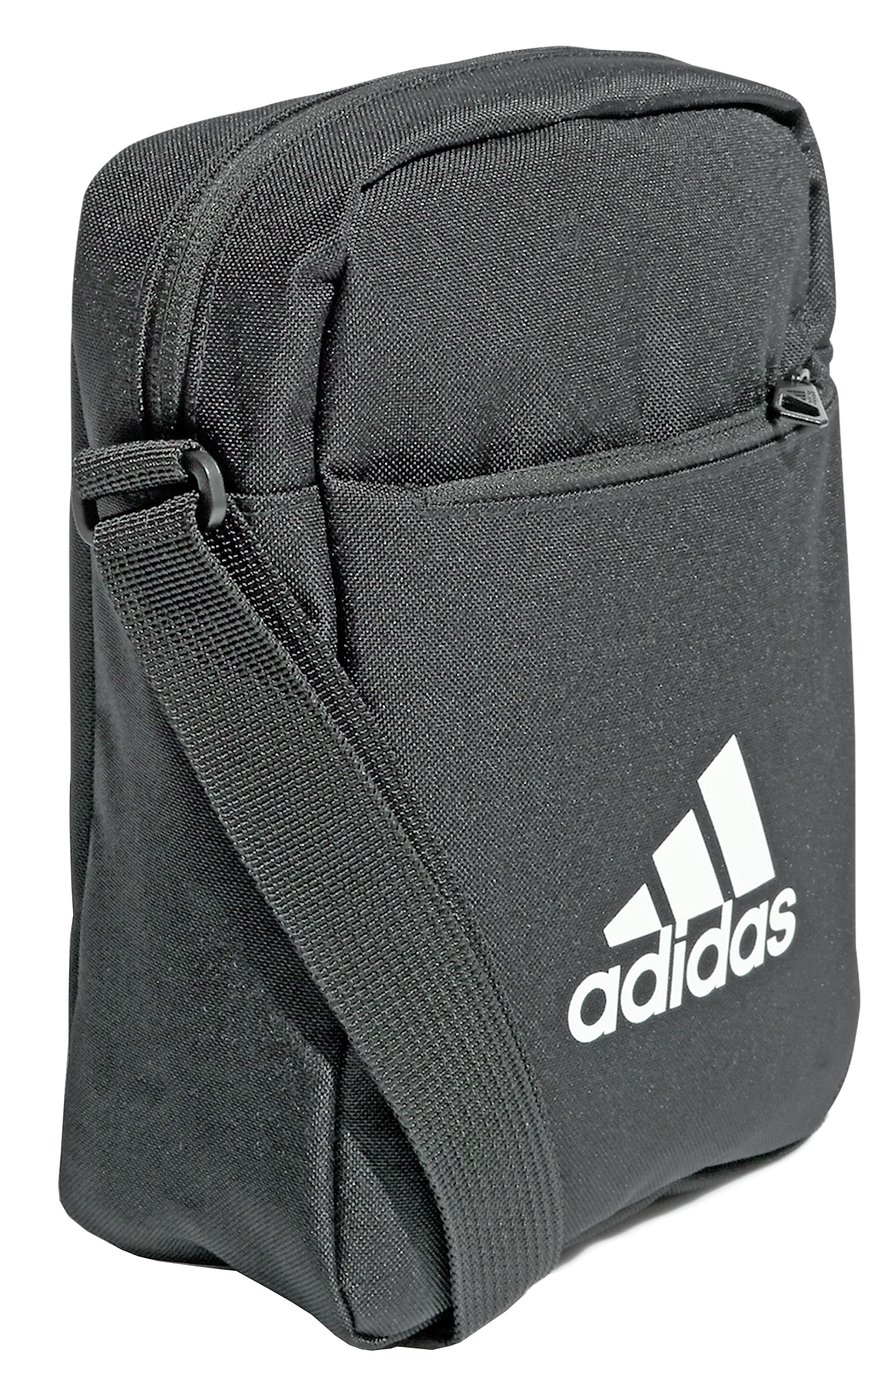 adidas messenger bags in Travel 